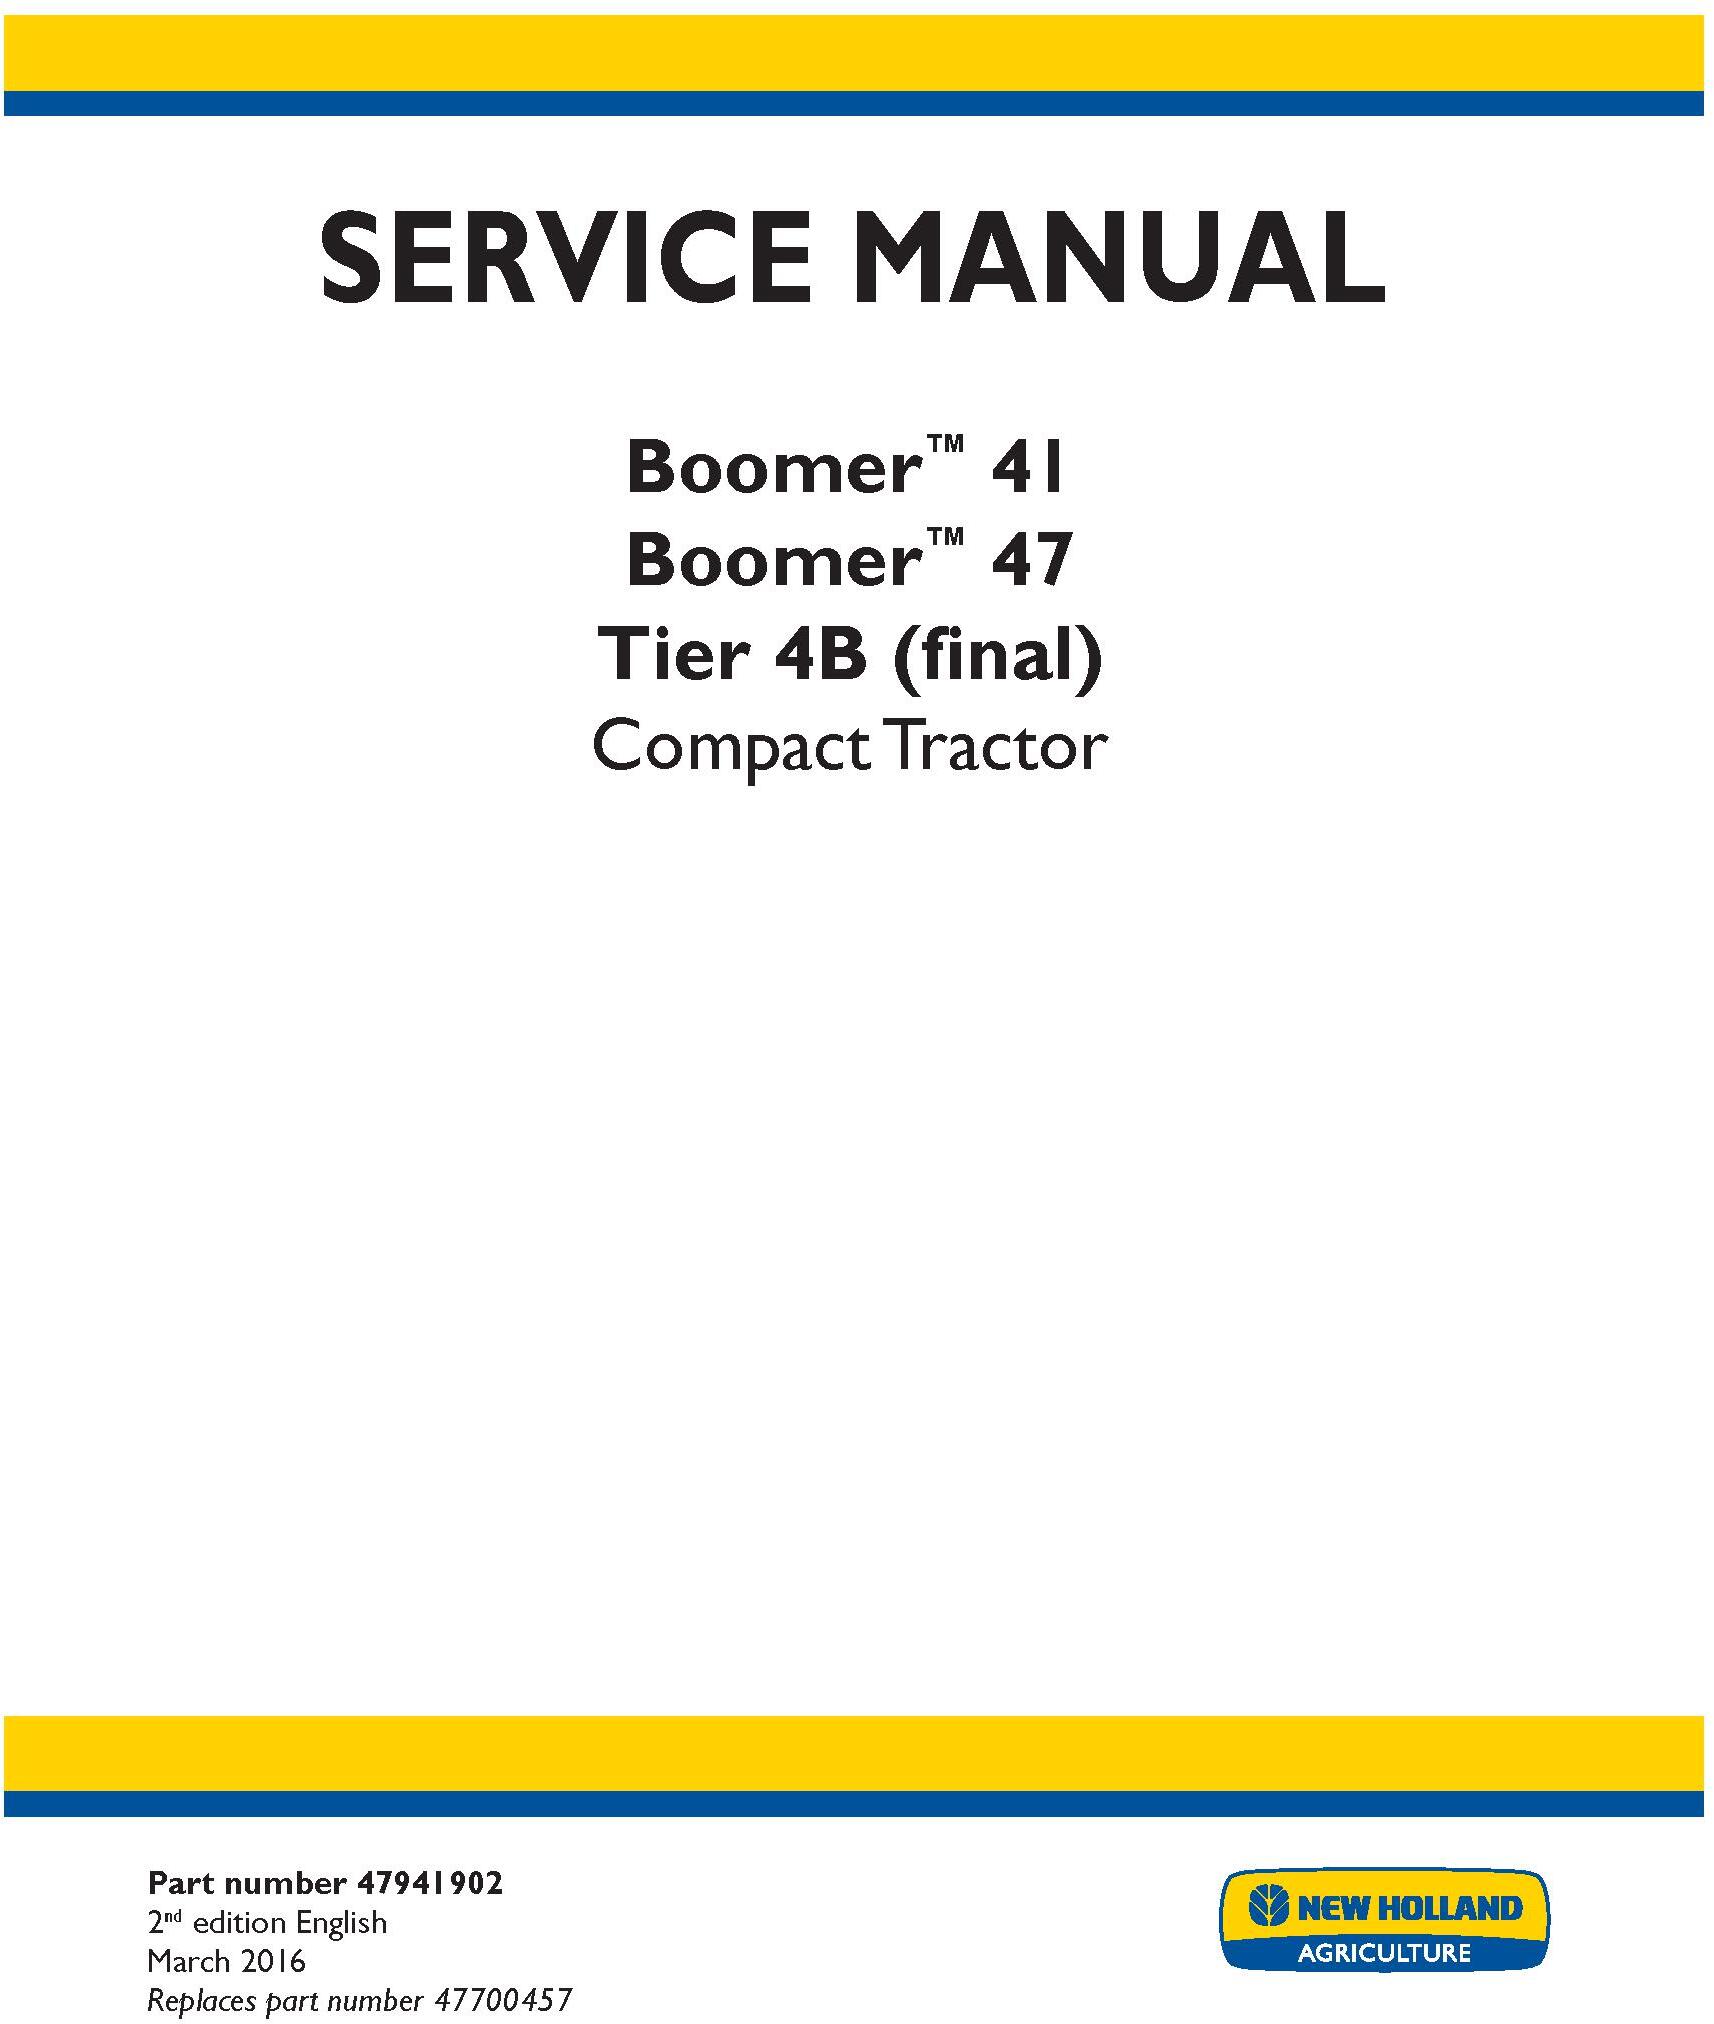 New Holland Boomer 41, 47 Tier 4B (final) Compact Tractor Complete Service Manual - 19471